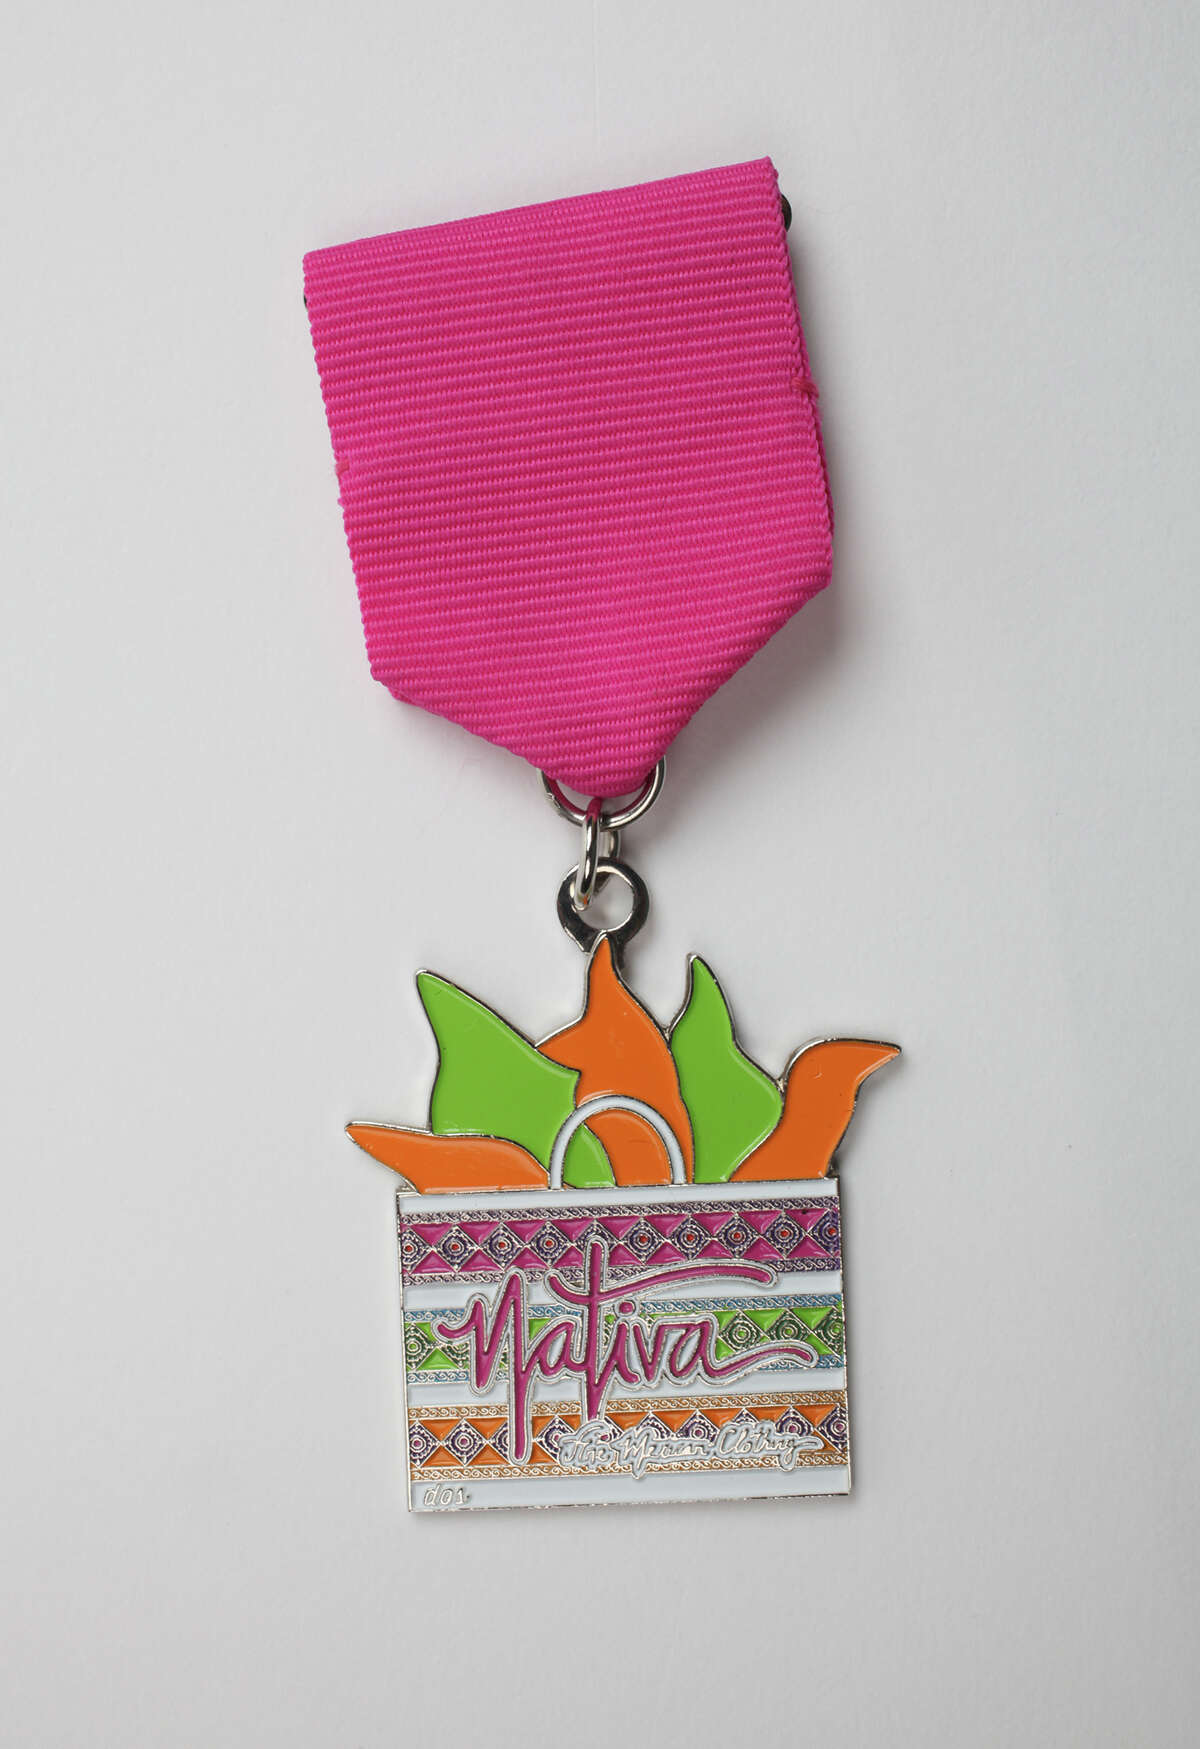 Small business. Runner-up: Nativa Fine Mexican Clothing medal, limited quantities, free with a purchase of $150 more